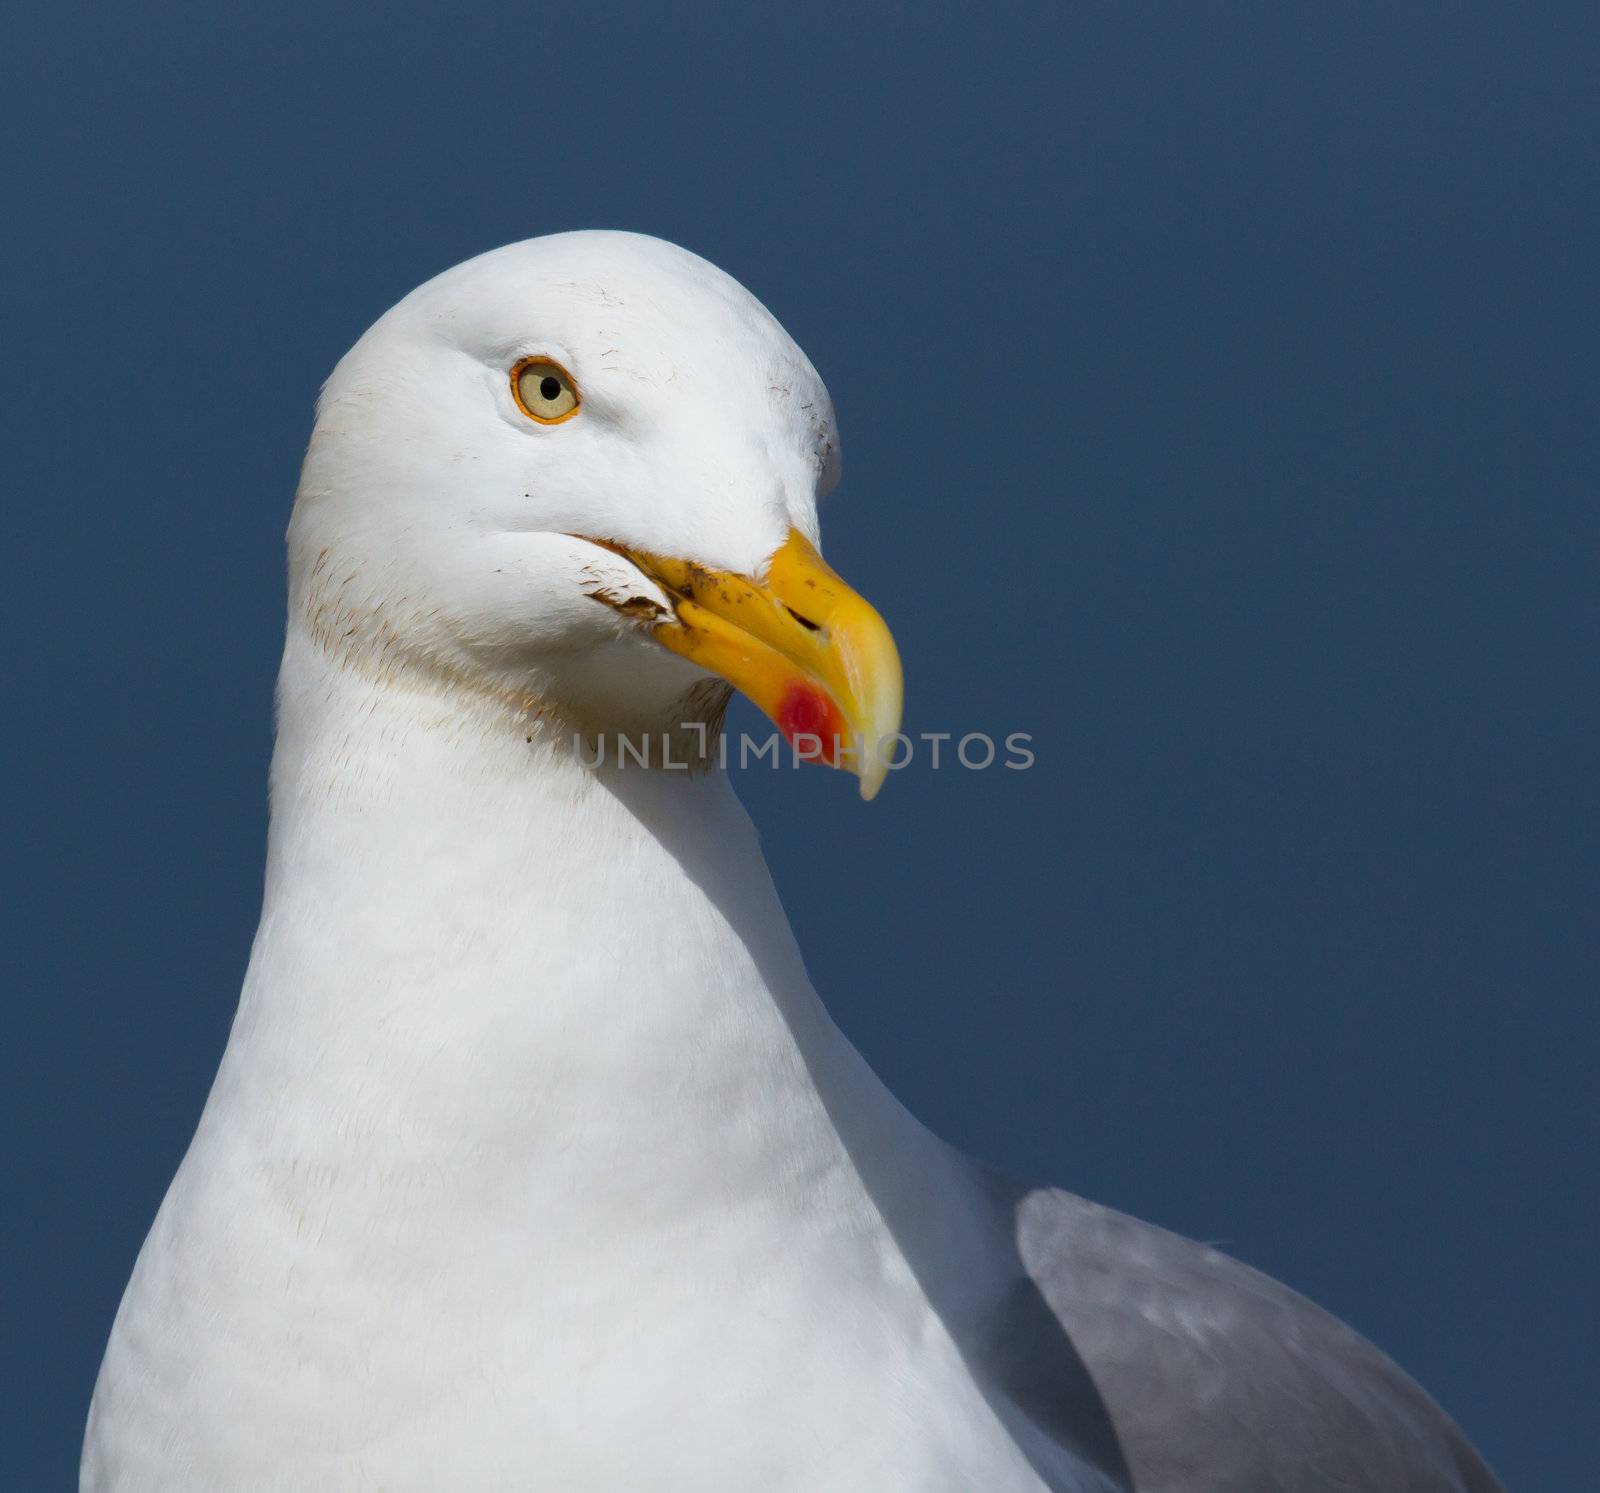 A close-up of a seagull in Helgoland